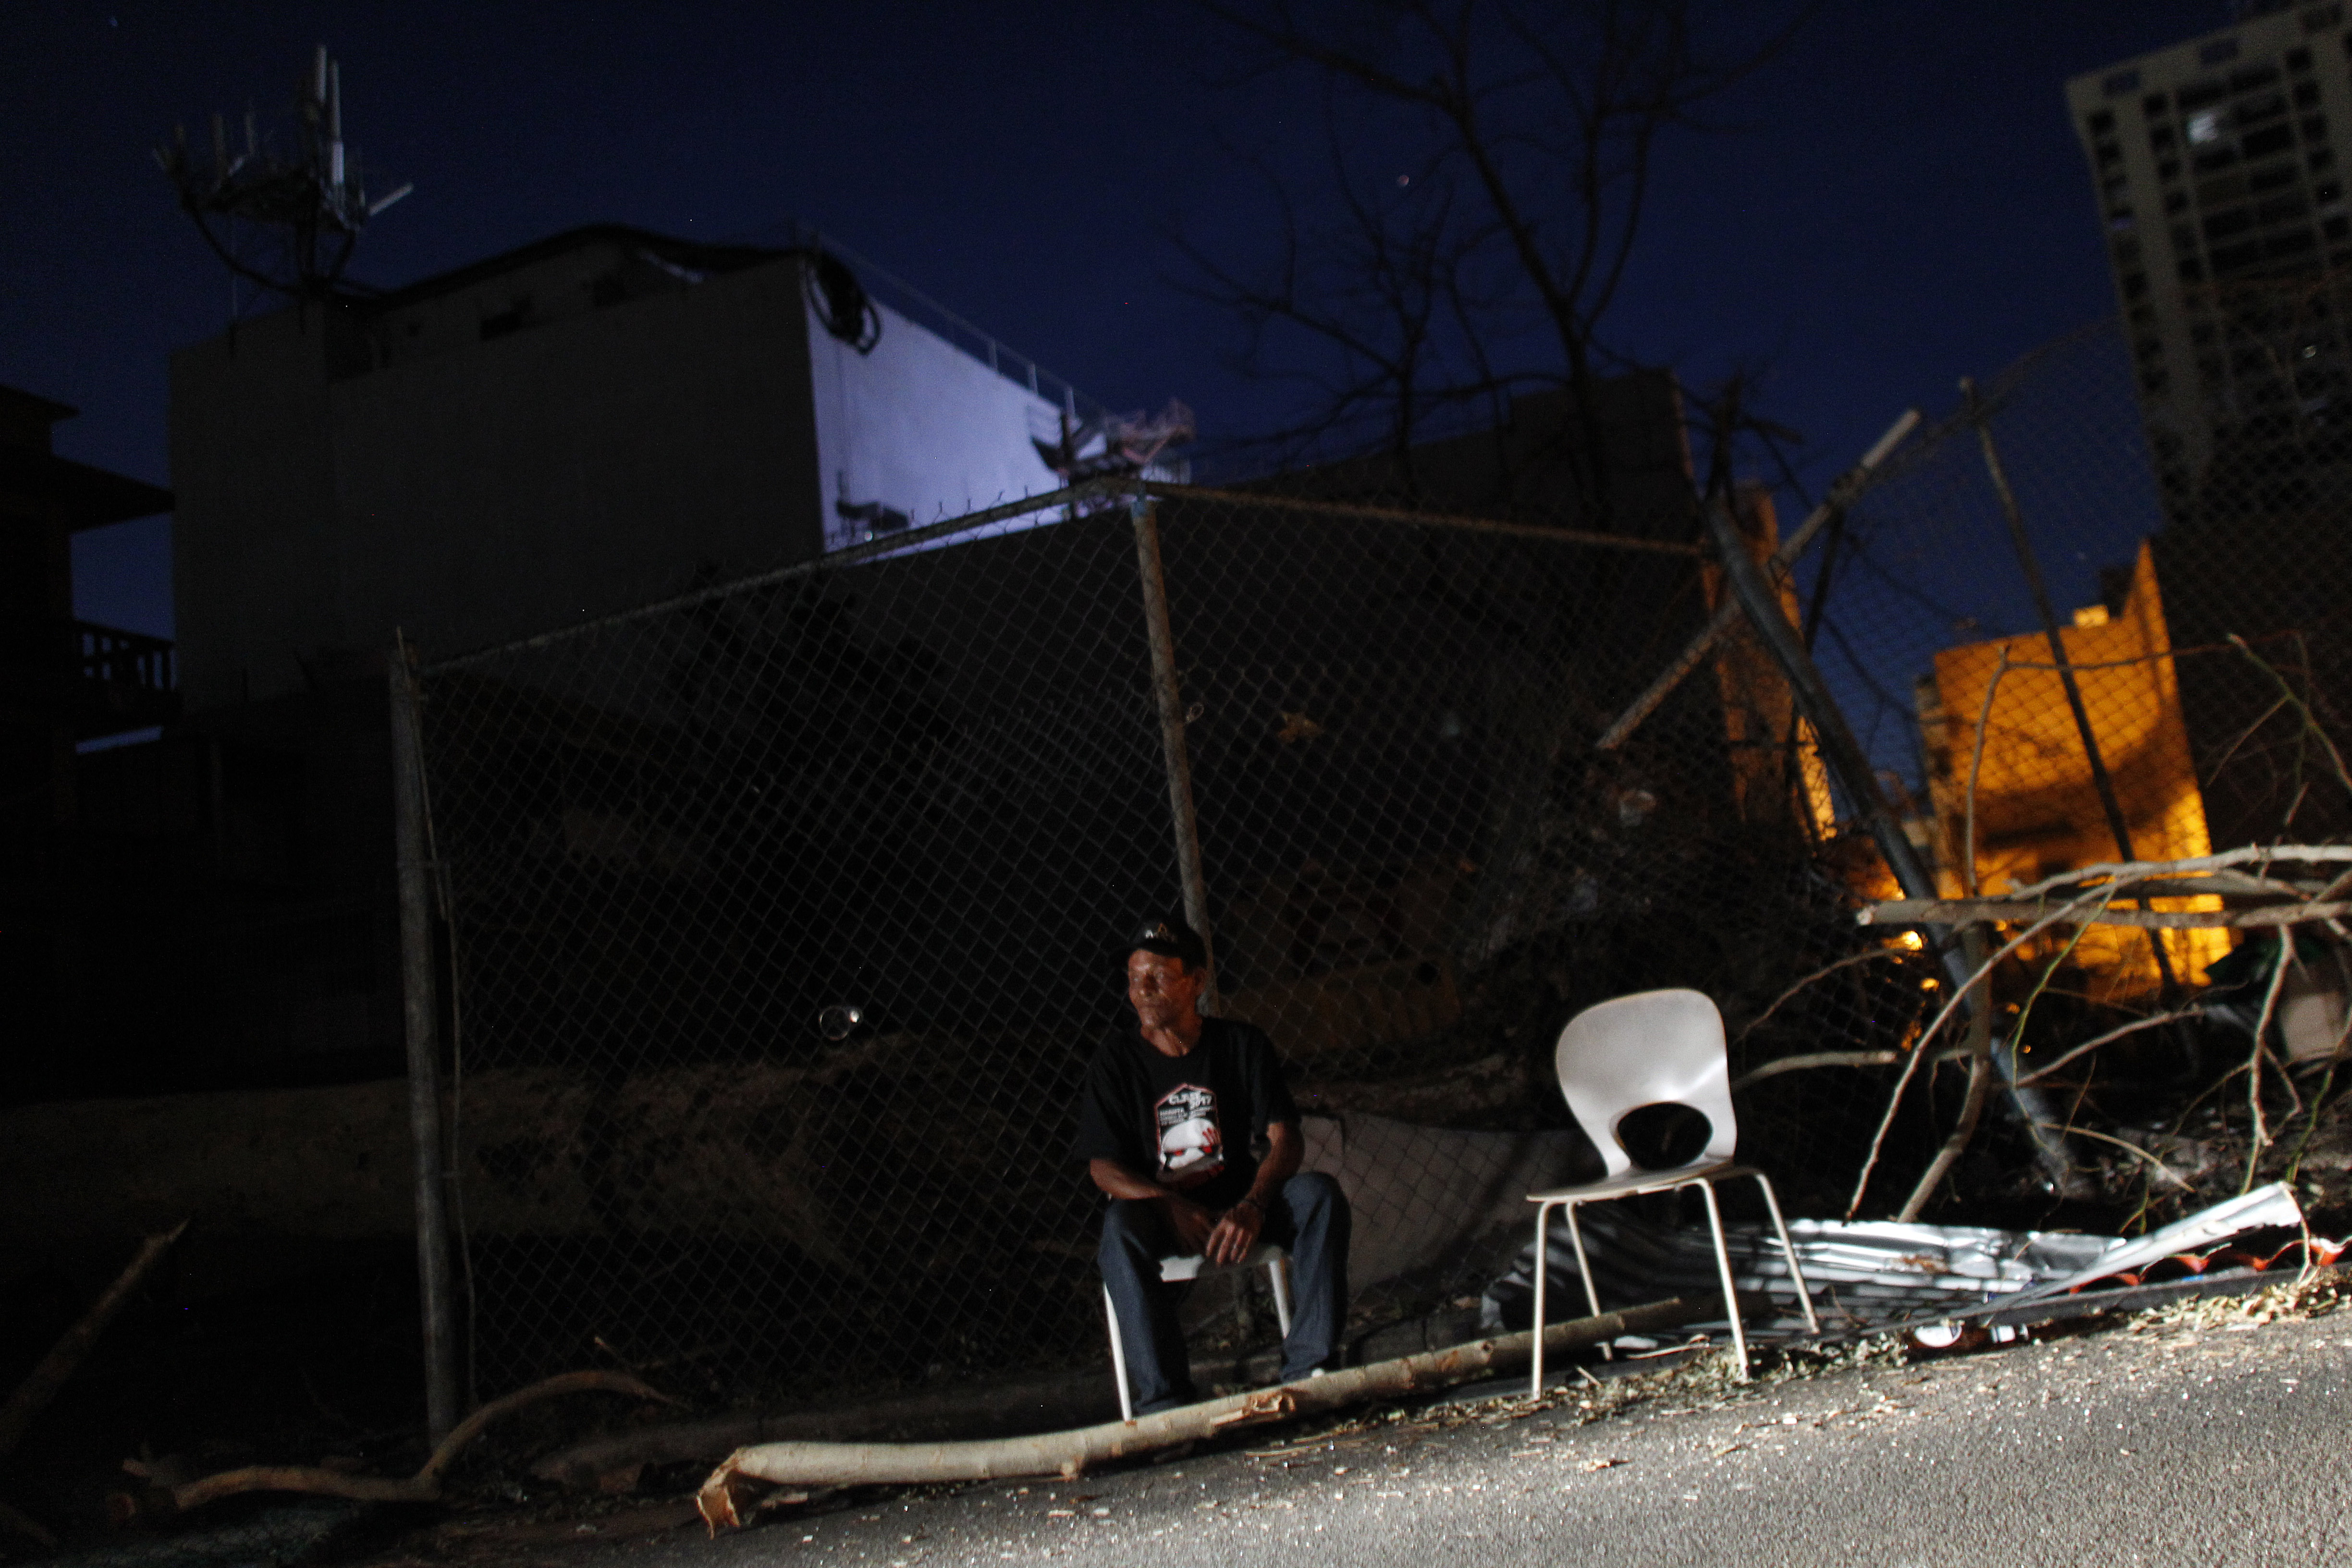 A man sits on a chair beside a road at night Sept. 25, 2017, in San Juan, Puerto Rico, where a 7 p.m. to 6 a.m. curfew has been imposed following the impact of Hurricane Maria on the island. (Credit: RICARDO ARDUENGO/AFP/Getty Images)